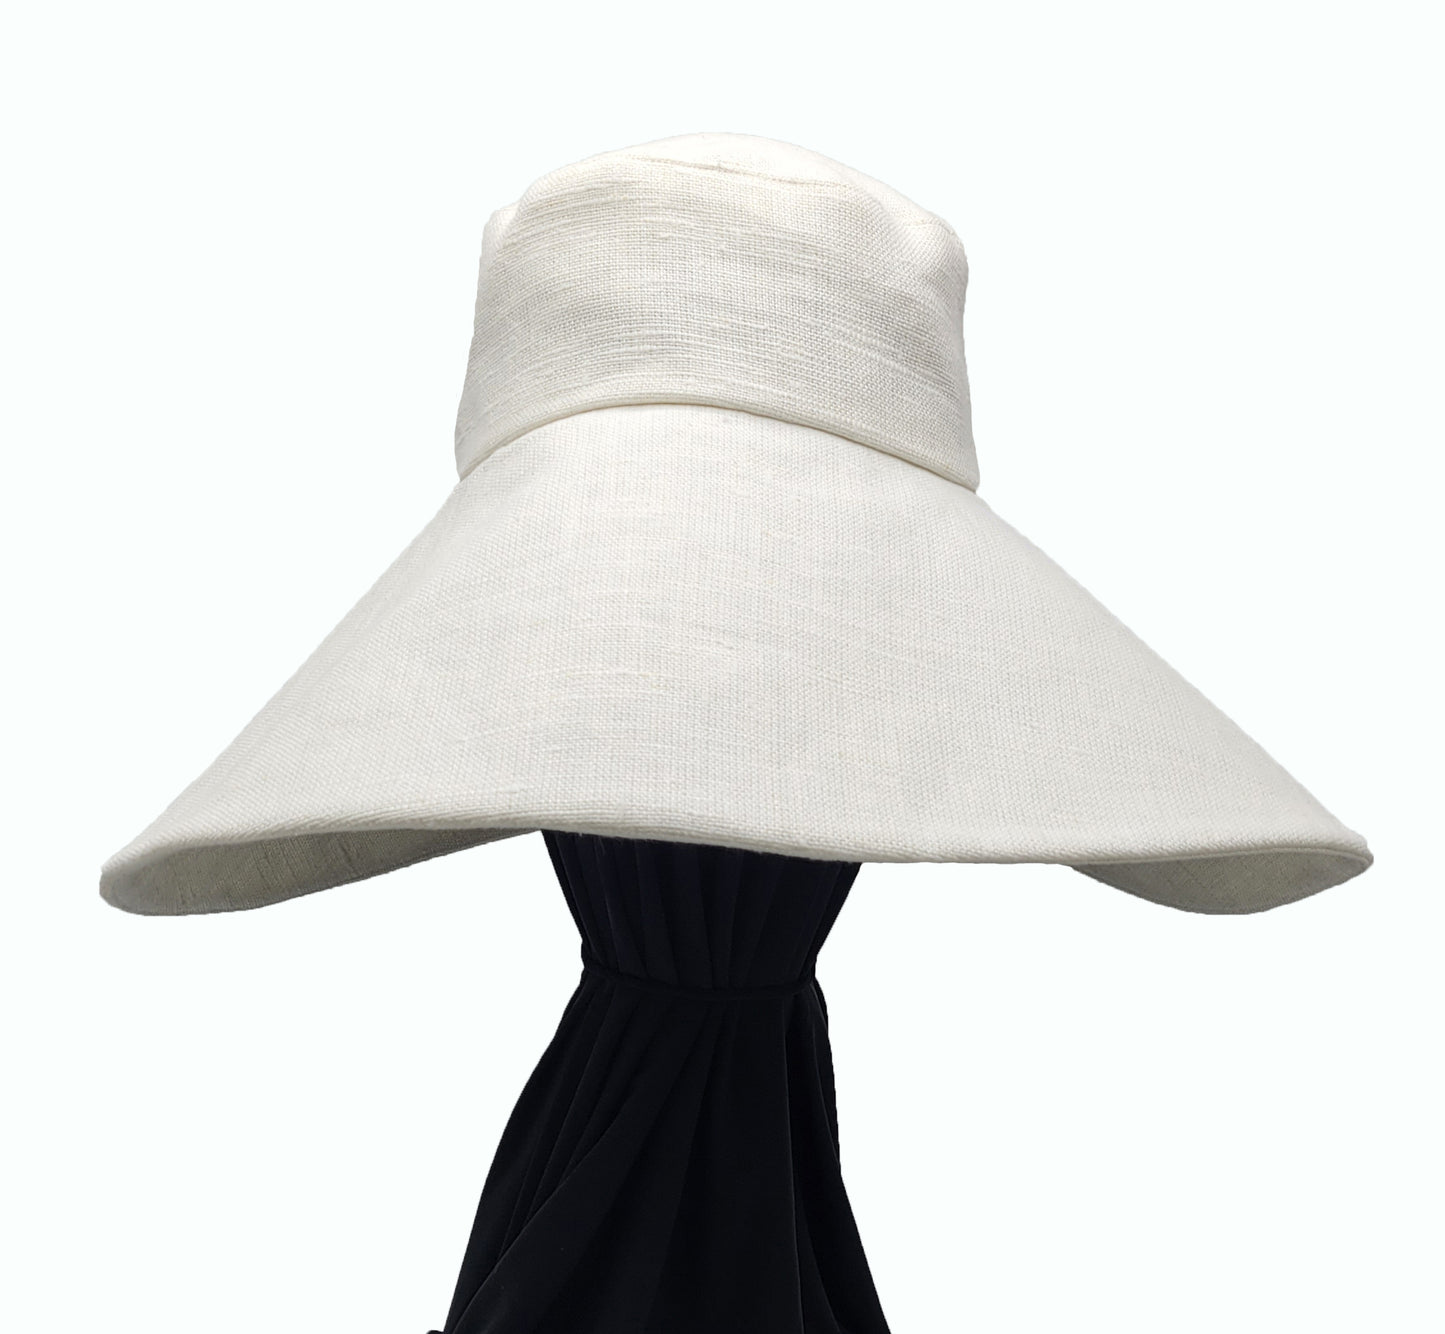 Extra Extra Large Brim Sun Hat, Women's Sun Hat, Wide Brim Summer Hat, Linen Sun Hat, Linen Hat with Extra Wide Brim, Sun Protection Hat